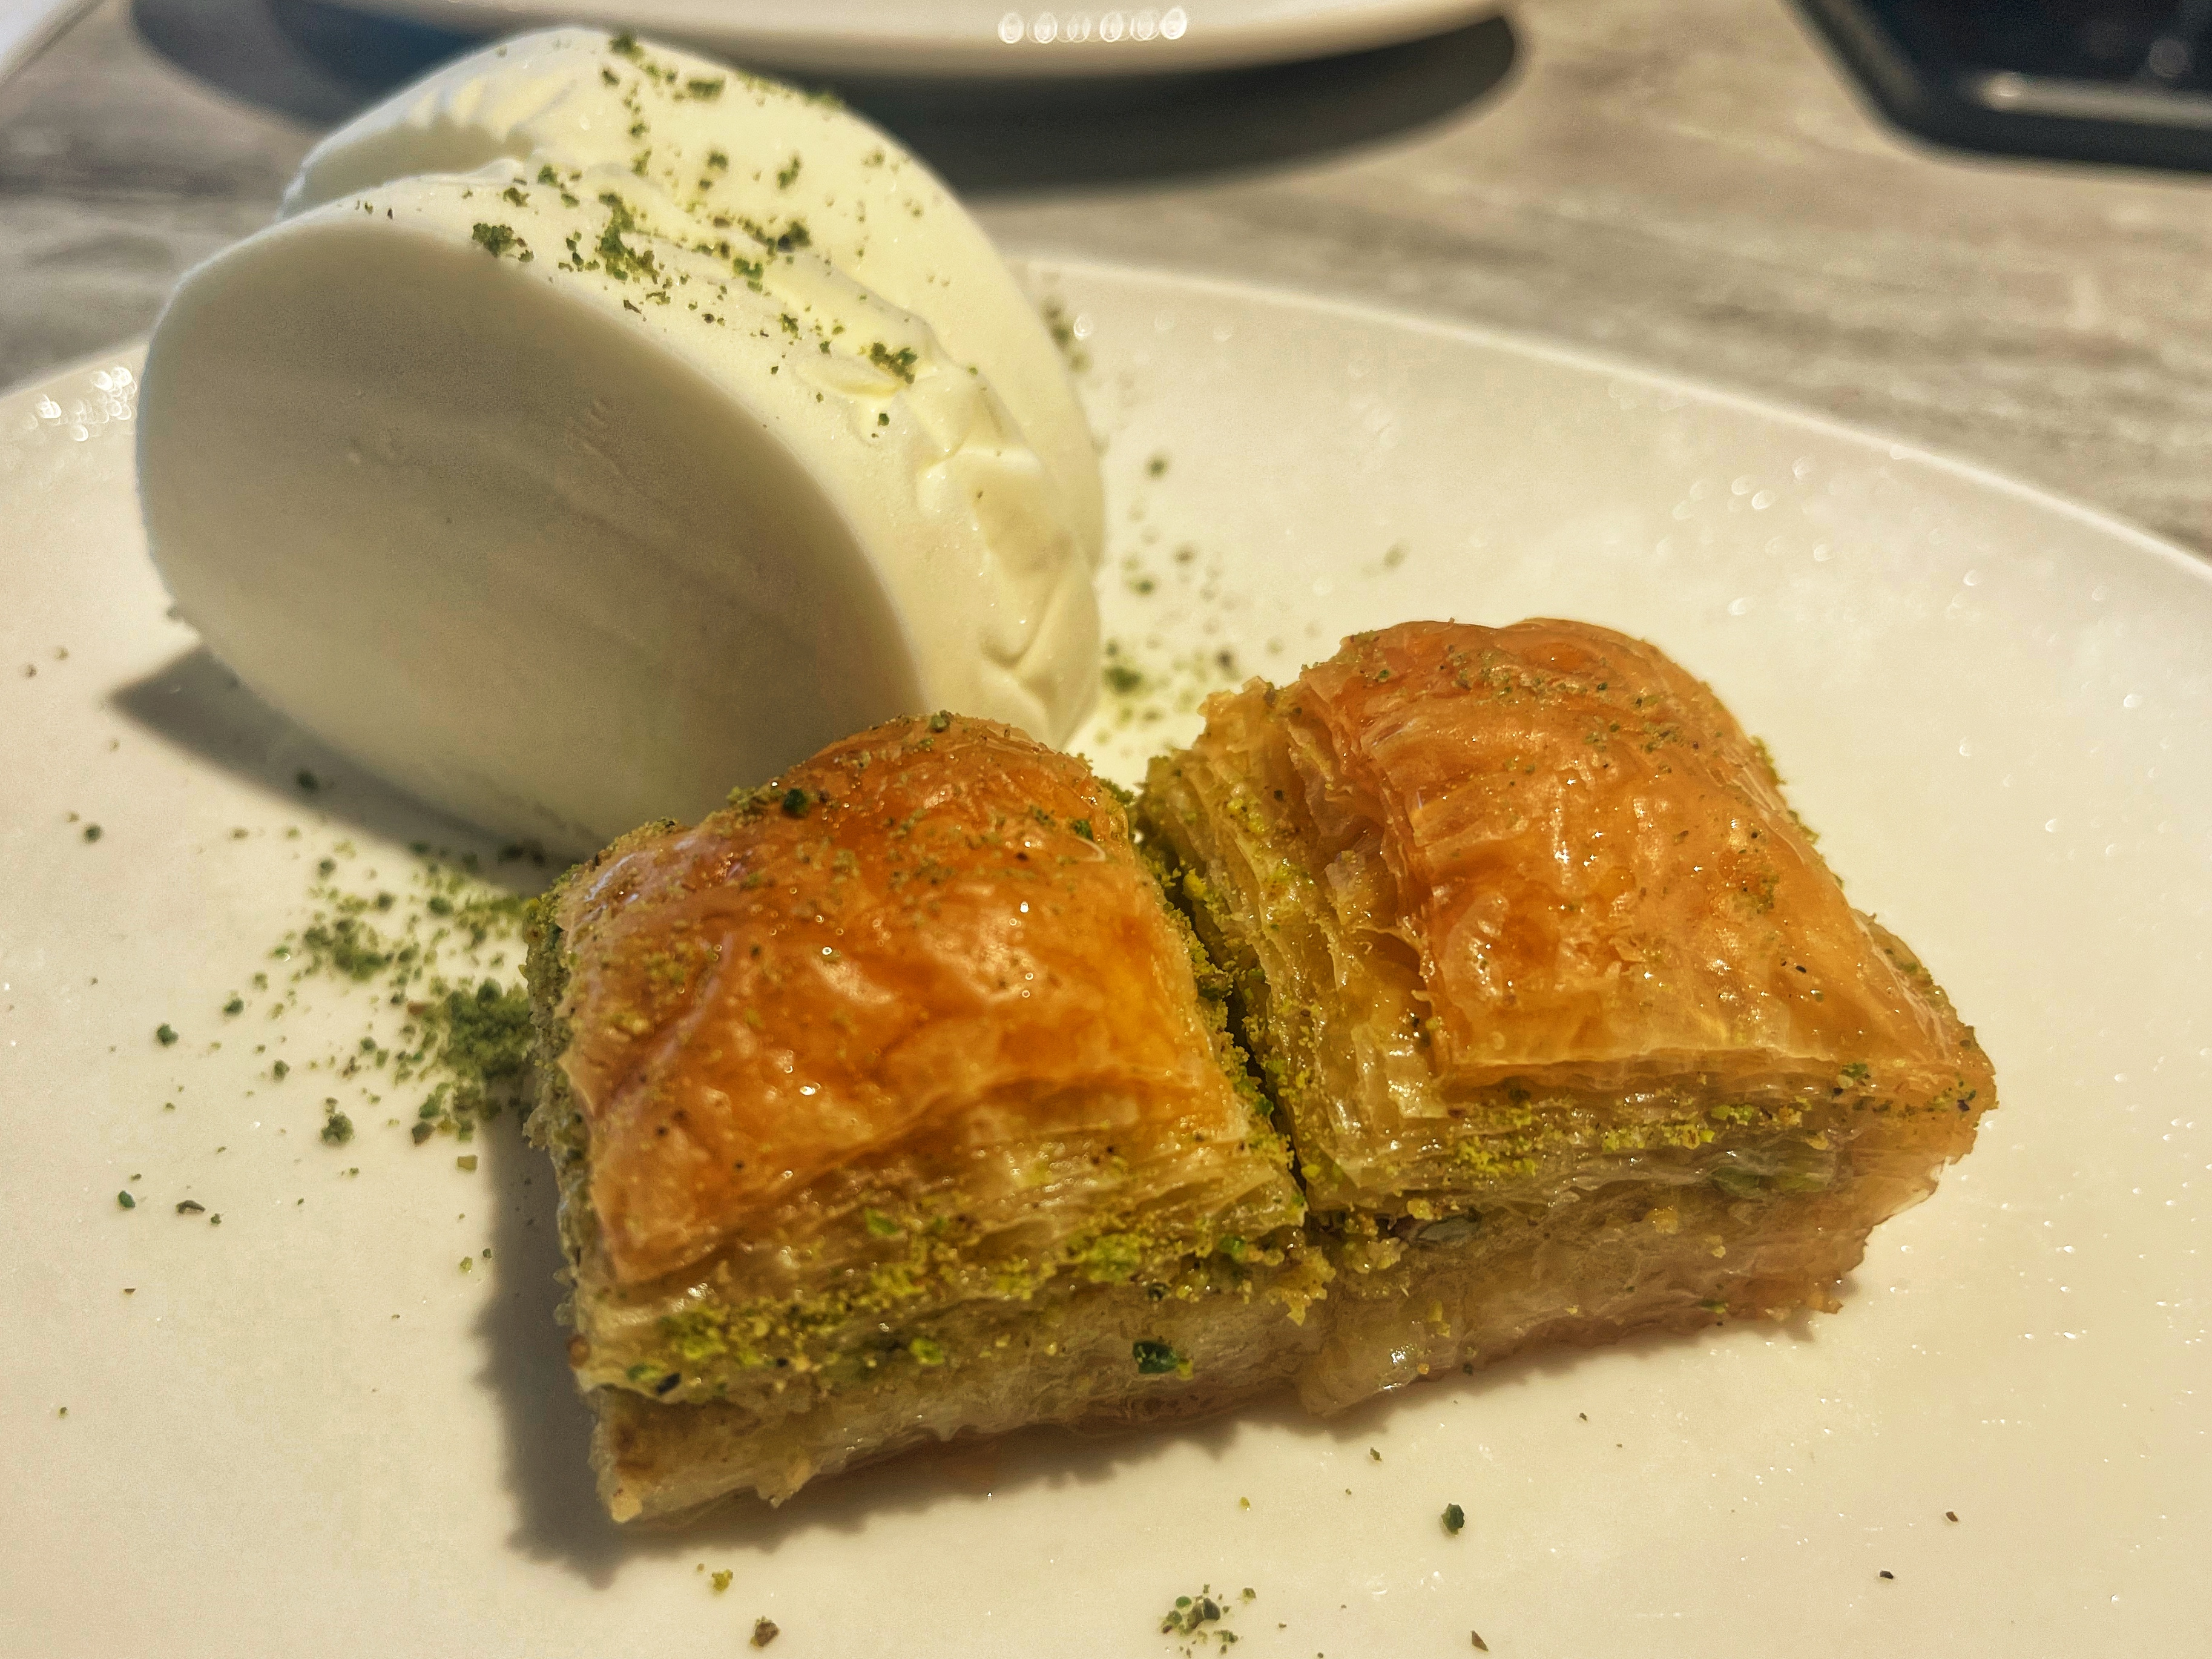 baklava and ice cream in Istanbul